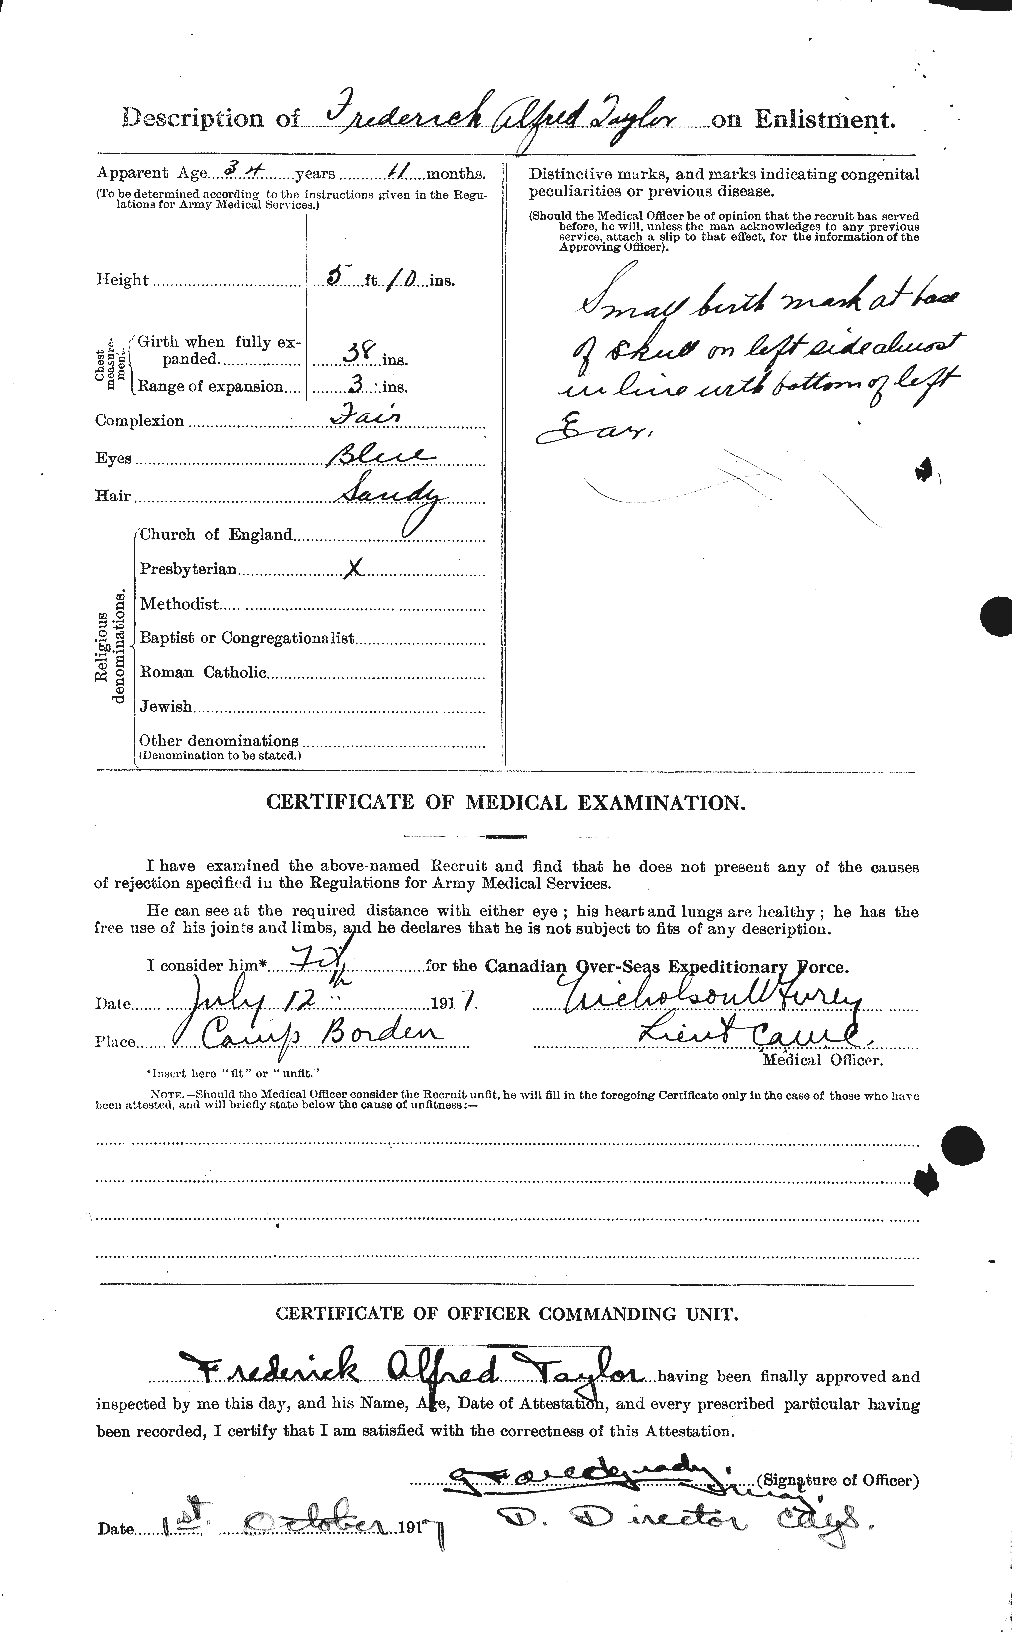 Personnel Records of the First World War - CEF 625786b